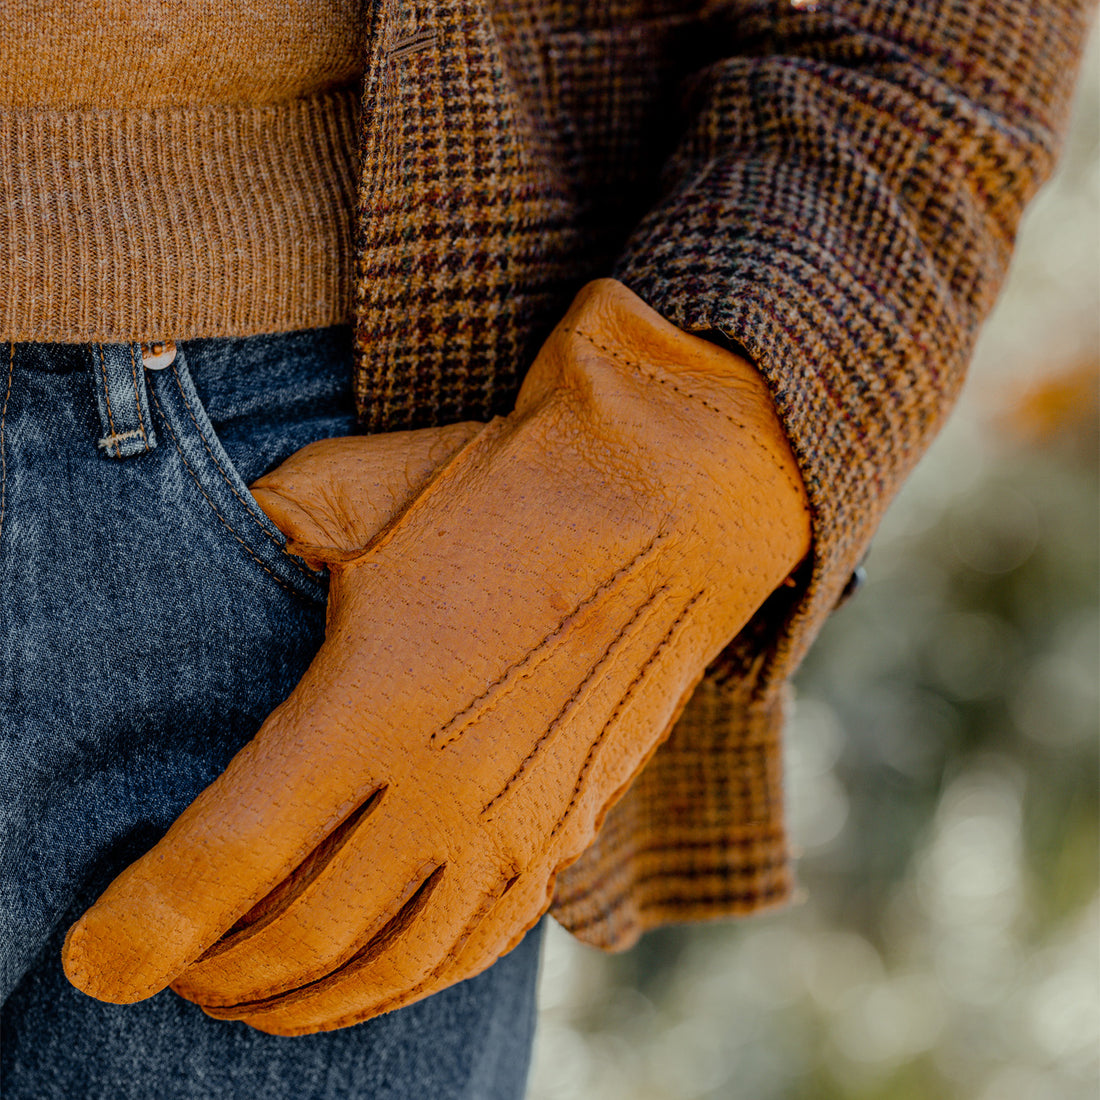 A person wearing a brown sweater and denim jeans tucking a pair of leather gloves into their pocket.